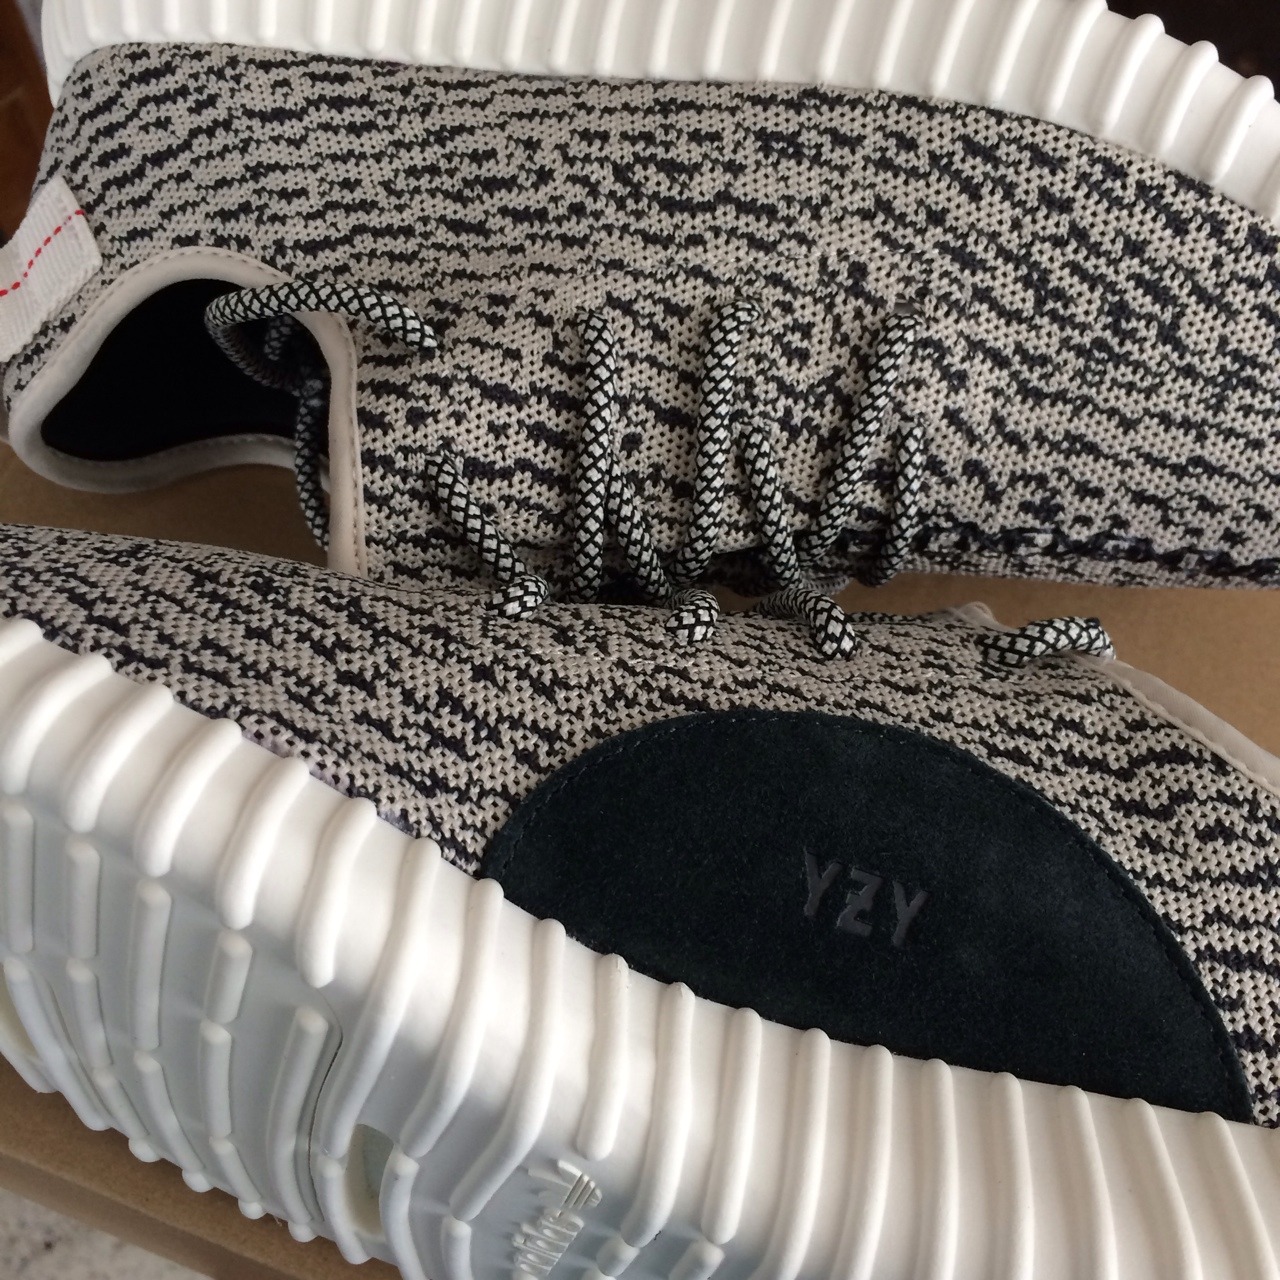 ﻿Yeezy 350 YZY Sale, Cheap Adidas Yeezy 350 YZY Boost Outlet 2017